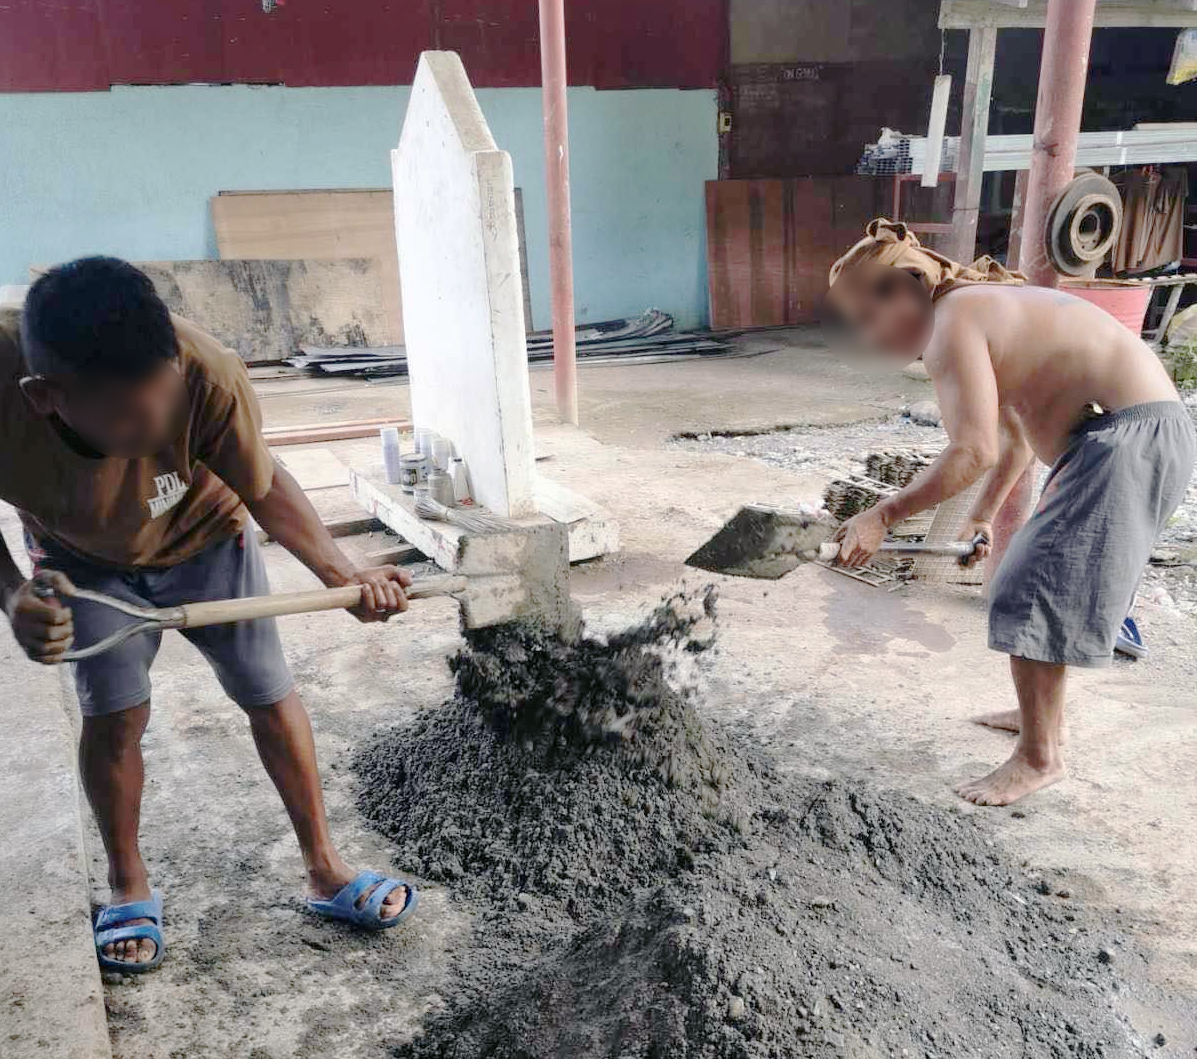 Persons deprived of liberty (PDL) in the Sablayan Prison and Penal Farm (SPPF) in Occidental Mindoro will begin making concrete hollow blocks, the Bureau of Corrections (BuCor) said.